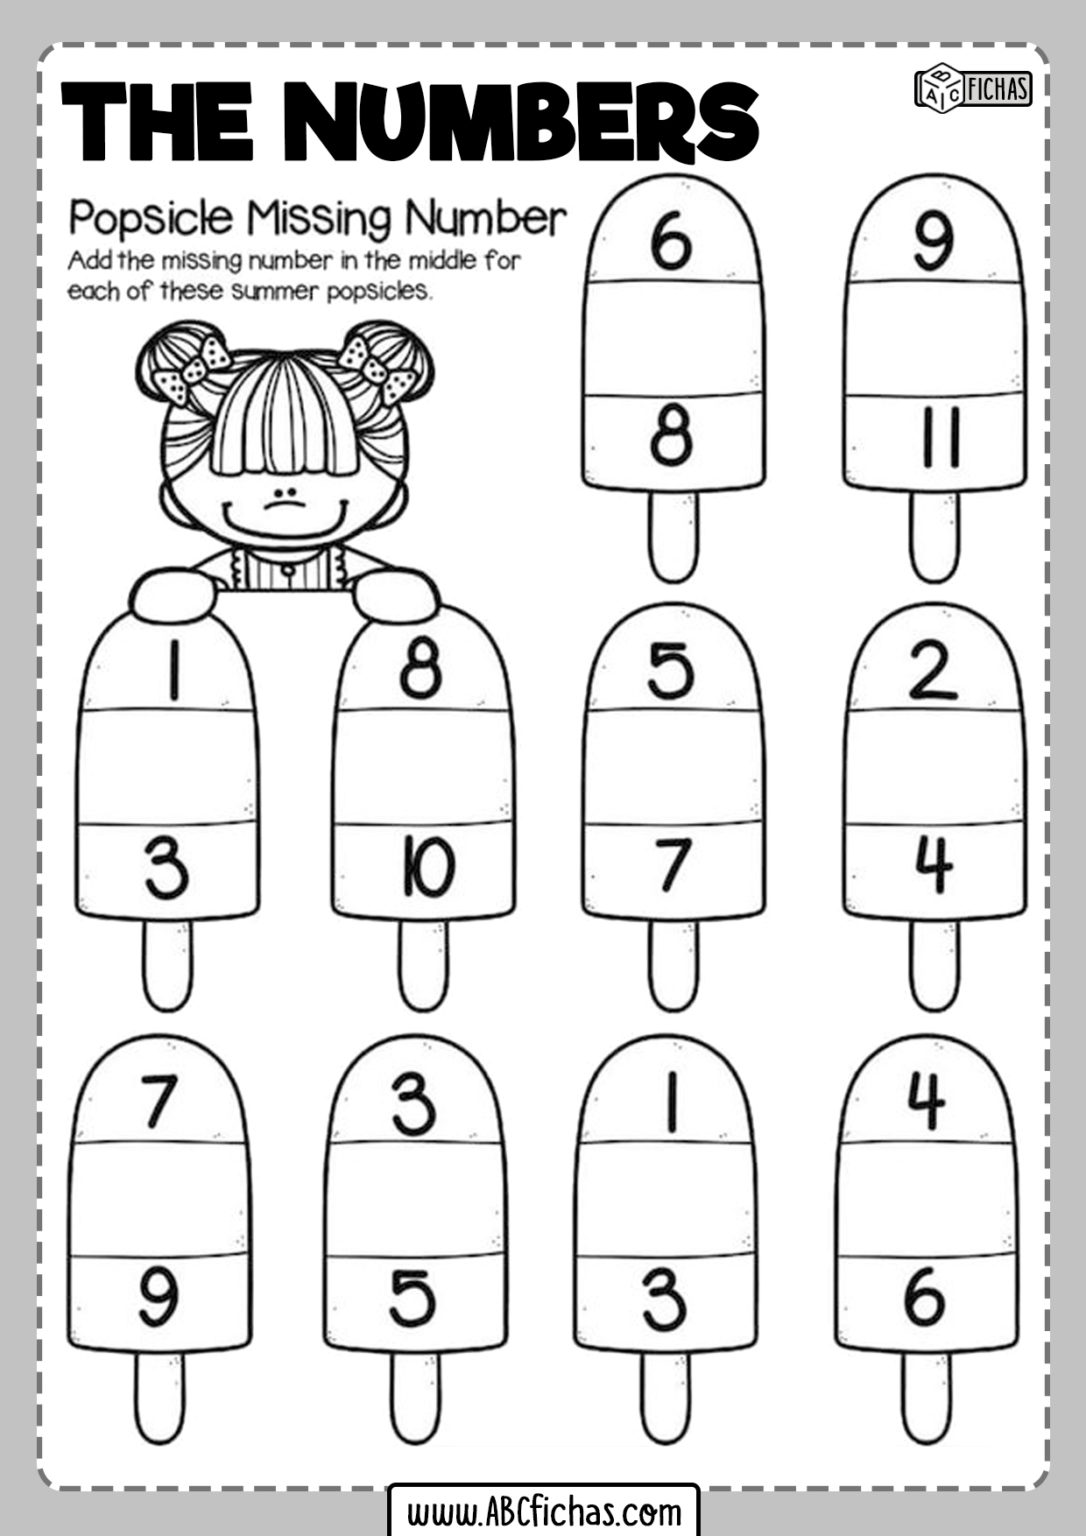 learning-numbers-worksheet-for-kids-abc-fichas